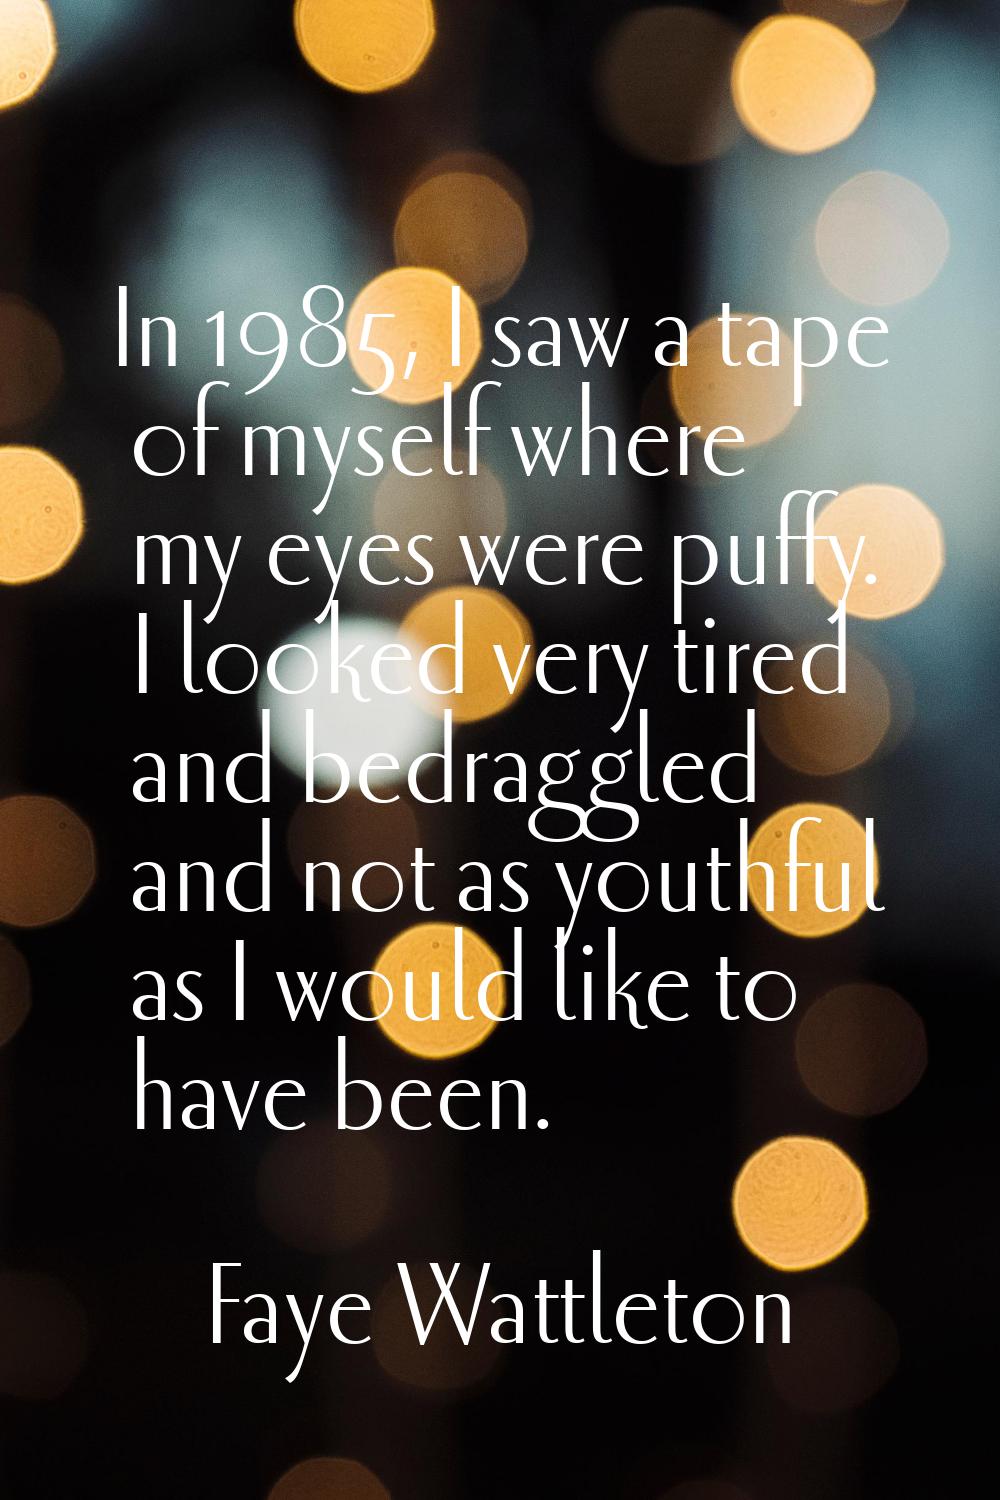 In 1985, I saw a tape of myself where my eyes were puffy. I looked very tired and bedraggled and no